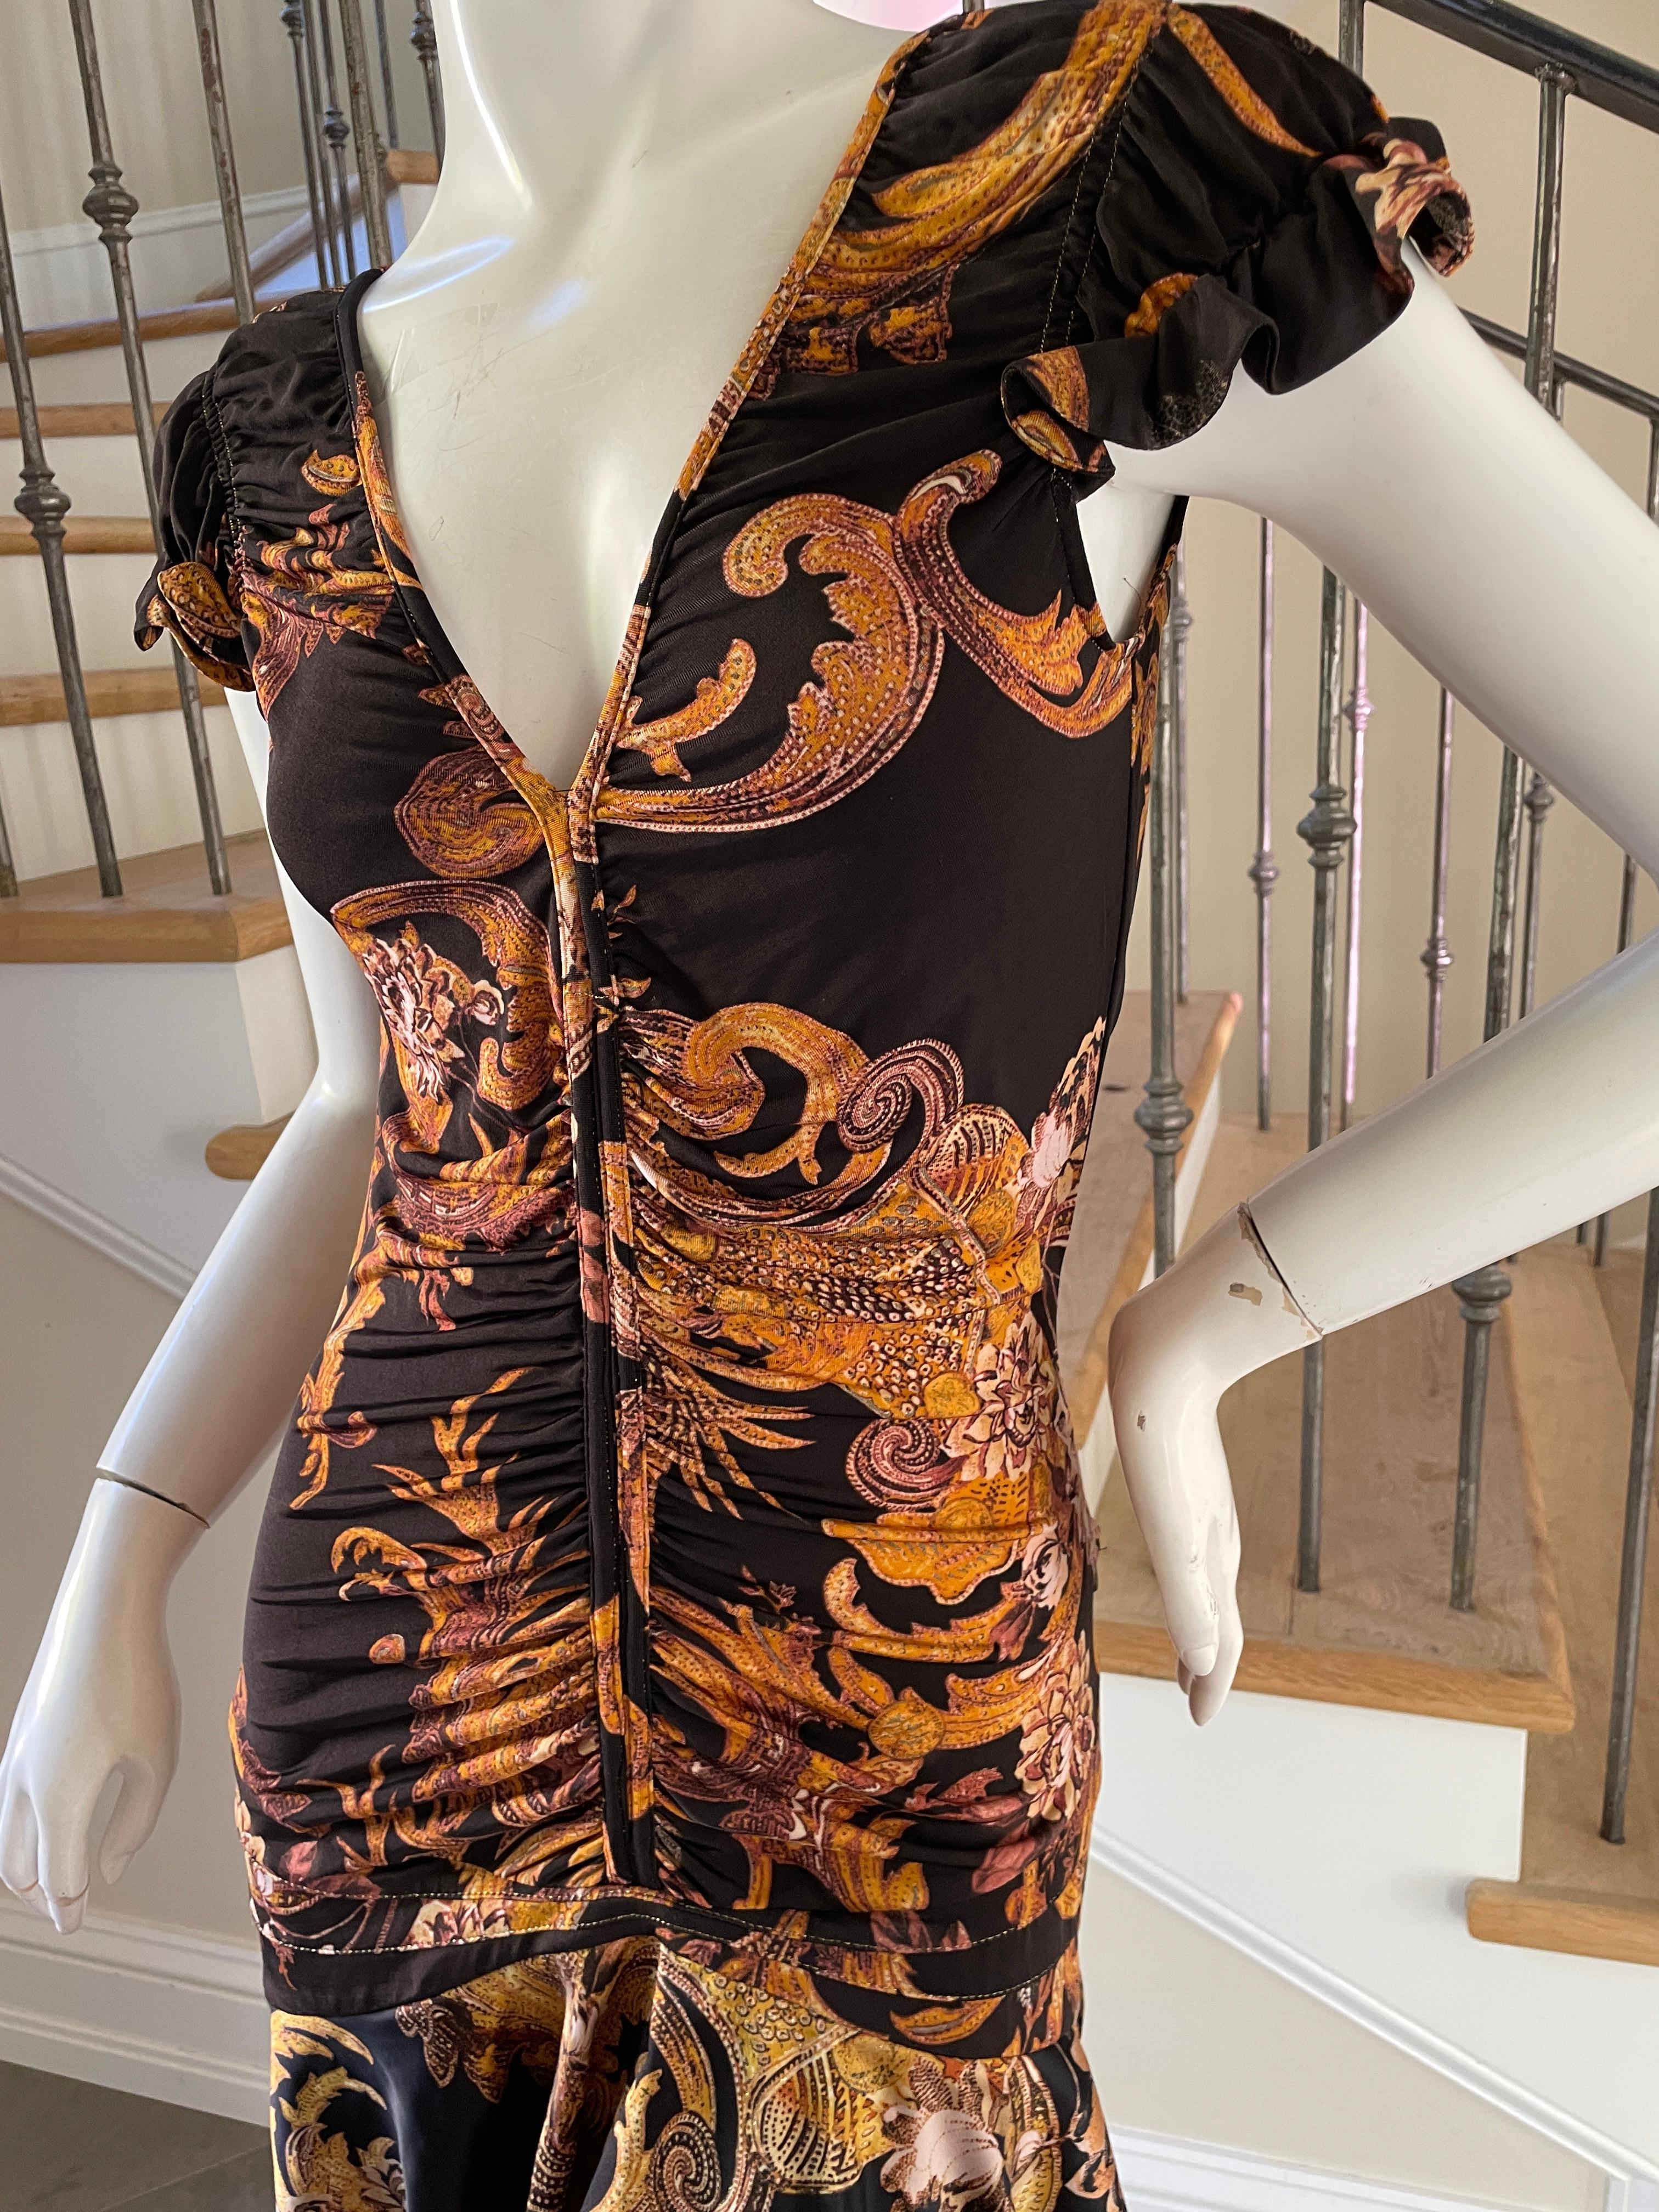 Roberto Cavalli for Just Cavalli Low Cut Baroque Pattern Mini Dress In Excellent Condition For Sale In Cloverdale, CA